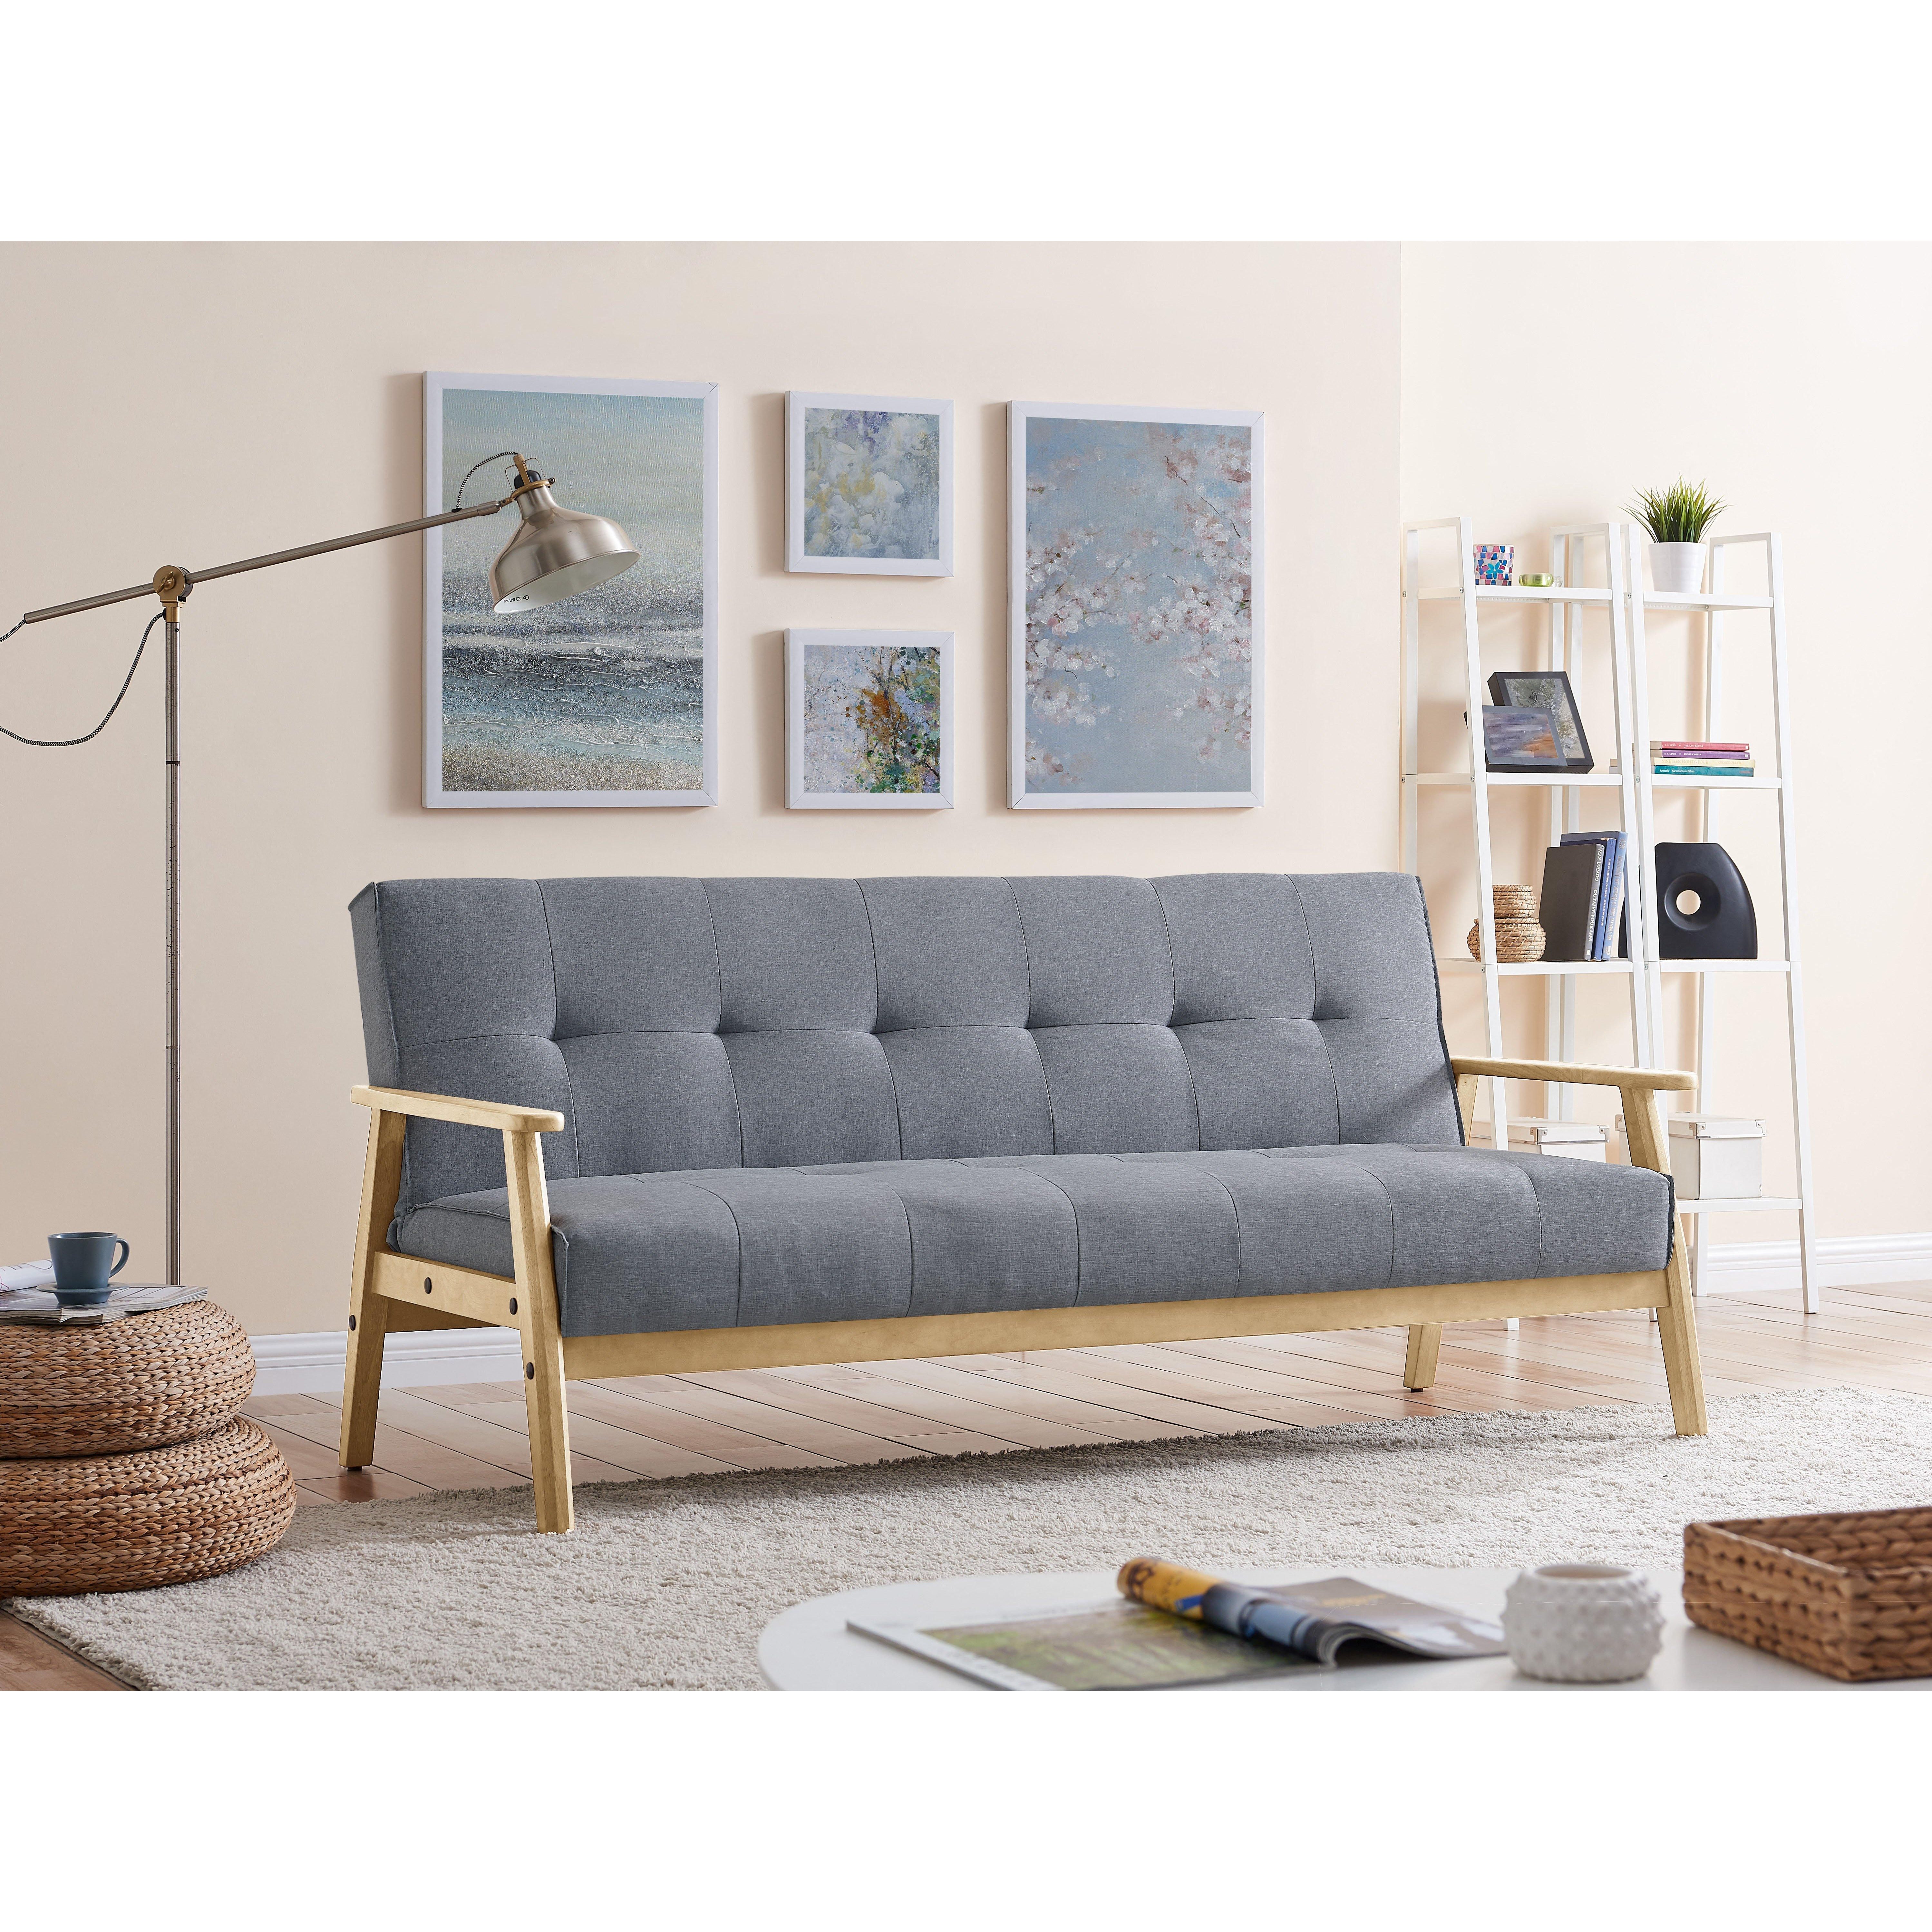 Langford Fabric Sofa Bed Scandinavian Style with Wooden Armrests and Legs - image 1